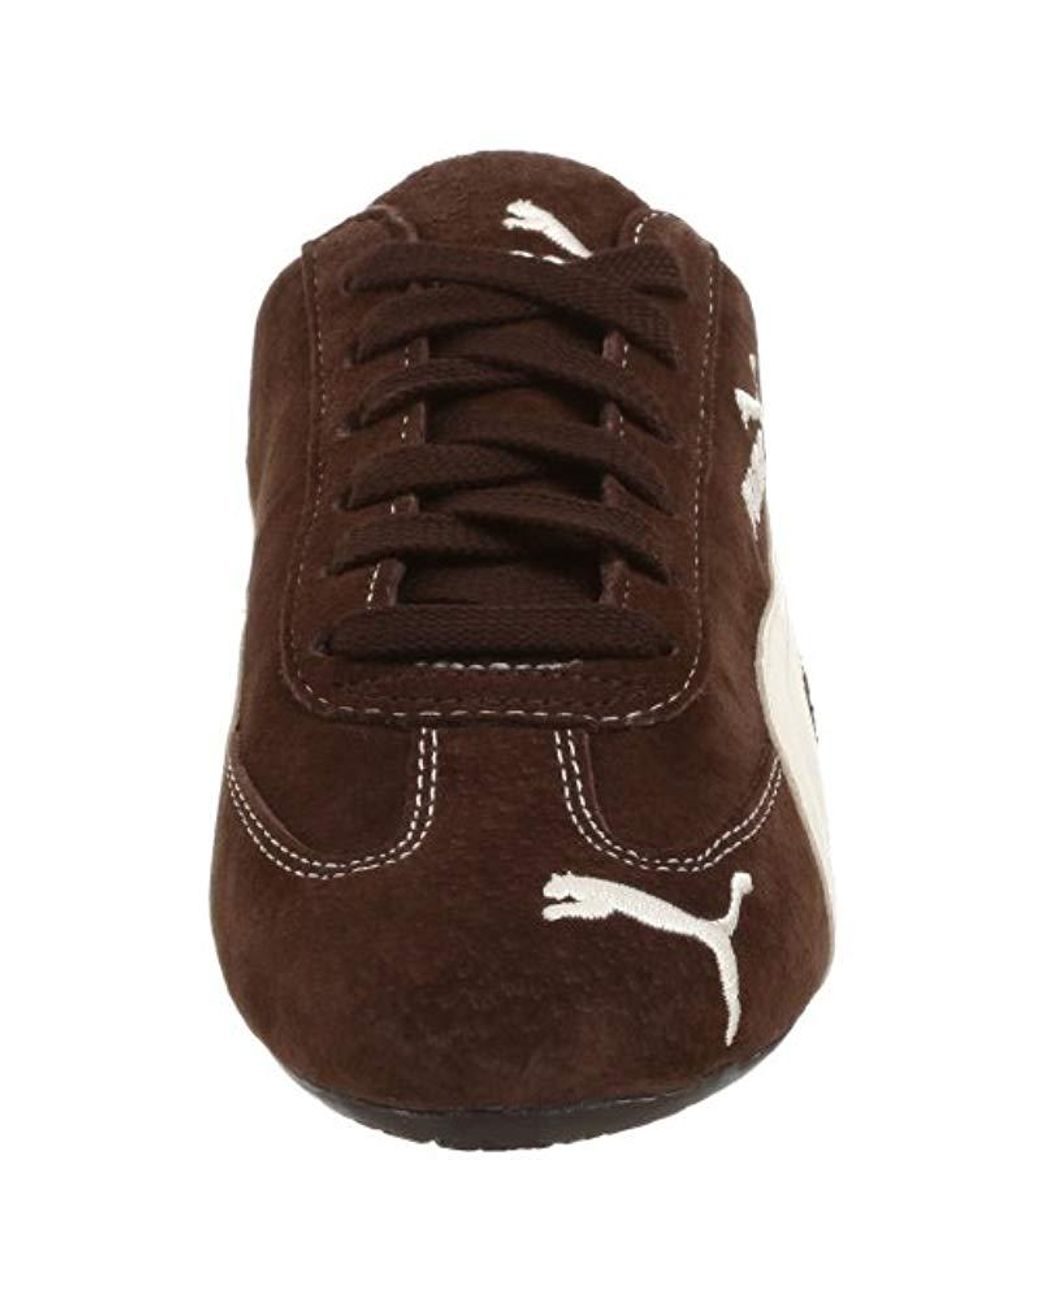 PUMA Suede Speed Cat Sd Us Sneaker in Brown/White (Brown) | Lyst